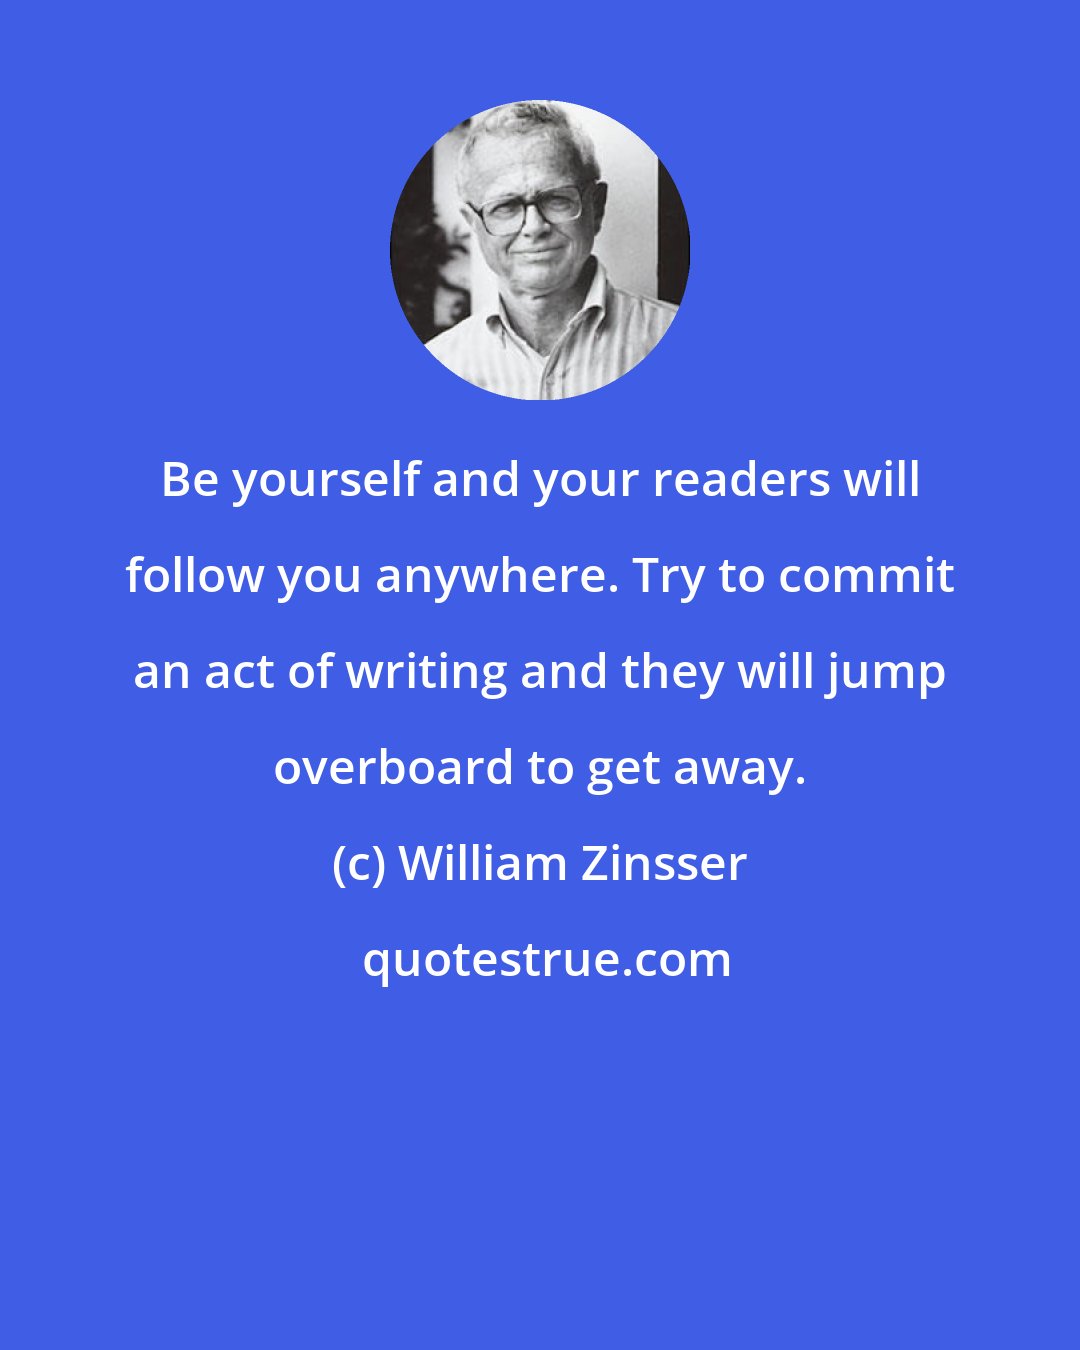 William Zinsser: Be yourself and your readers will follow you anywhere. Try to commit an act of writing and they will jump overboard to get away.